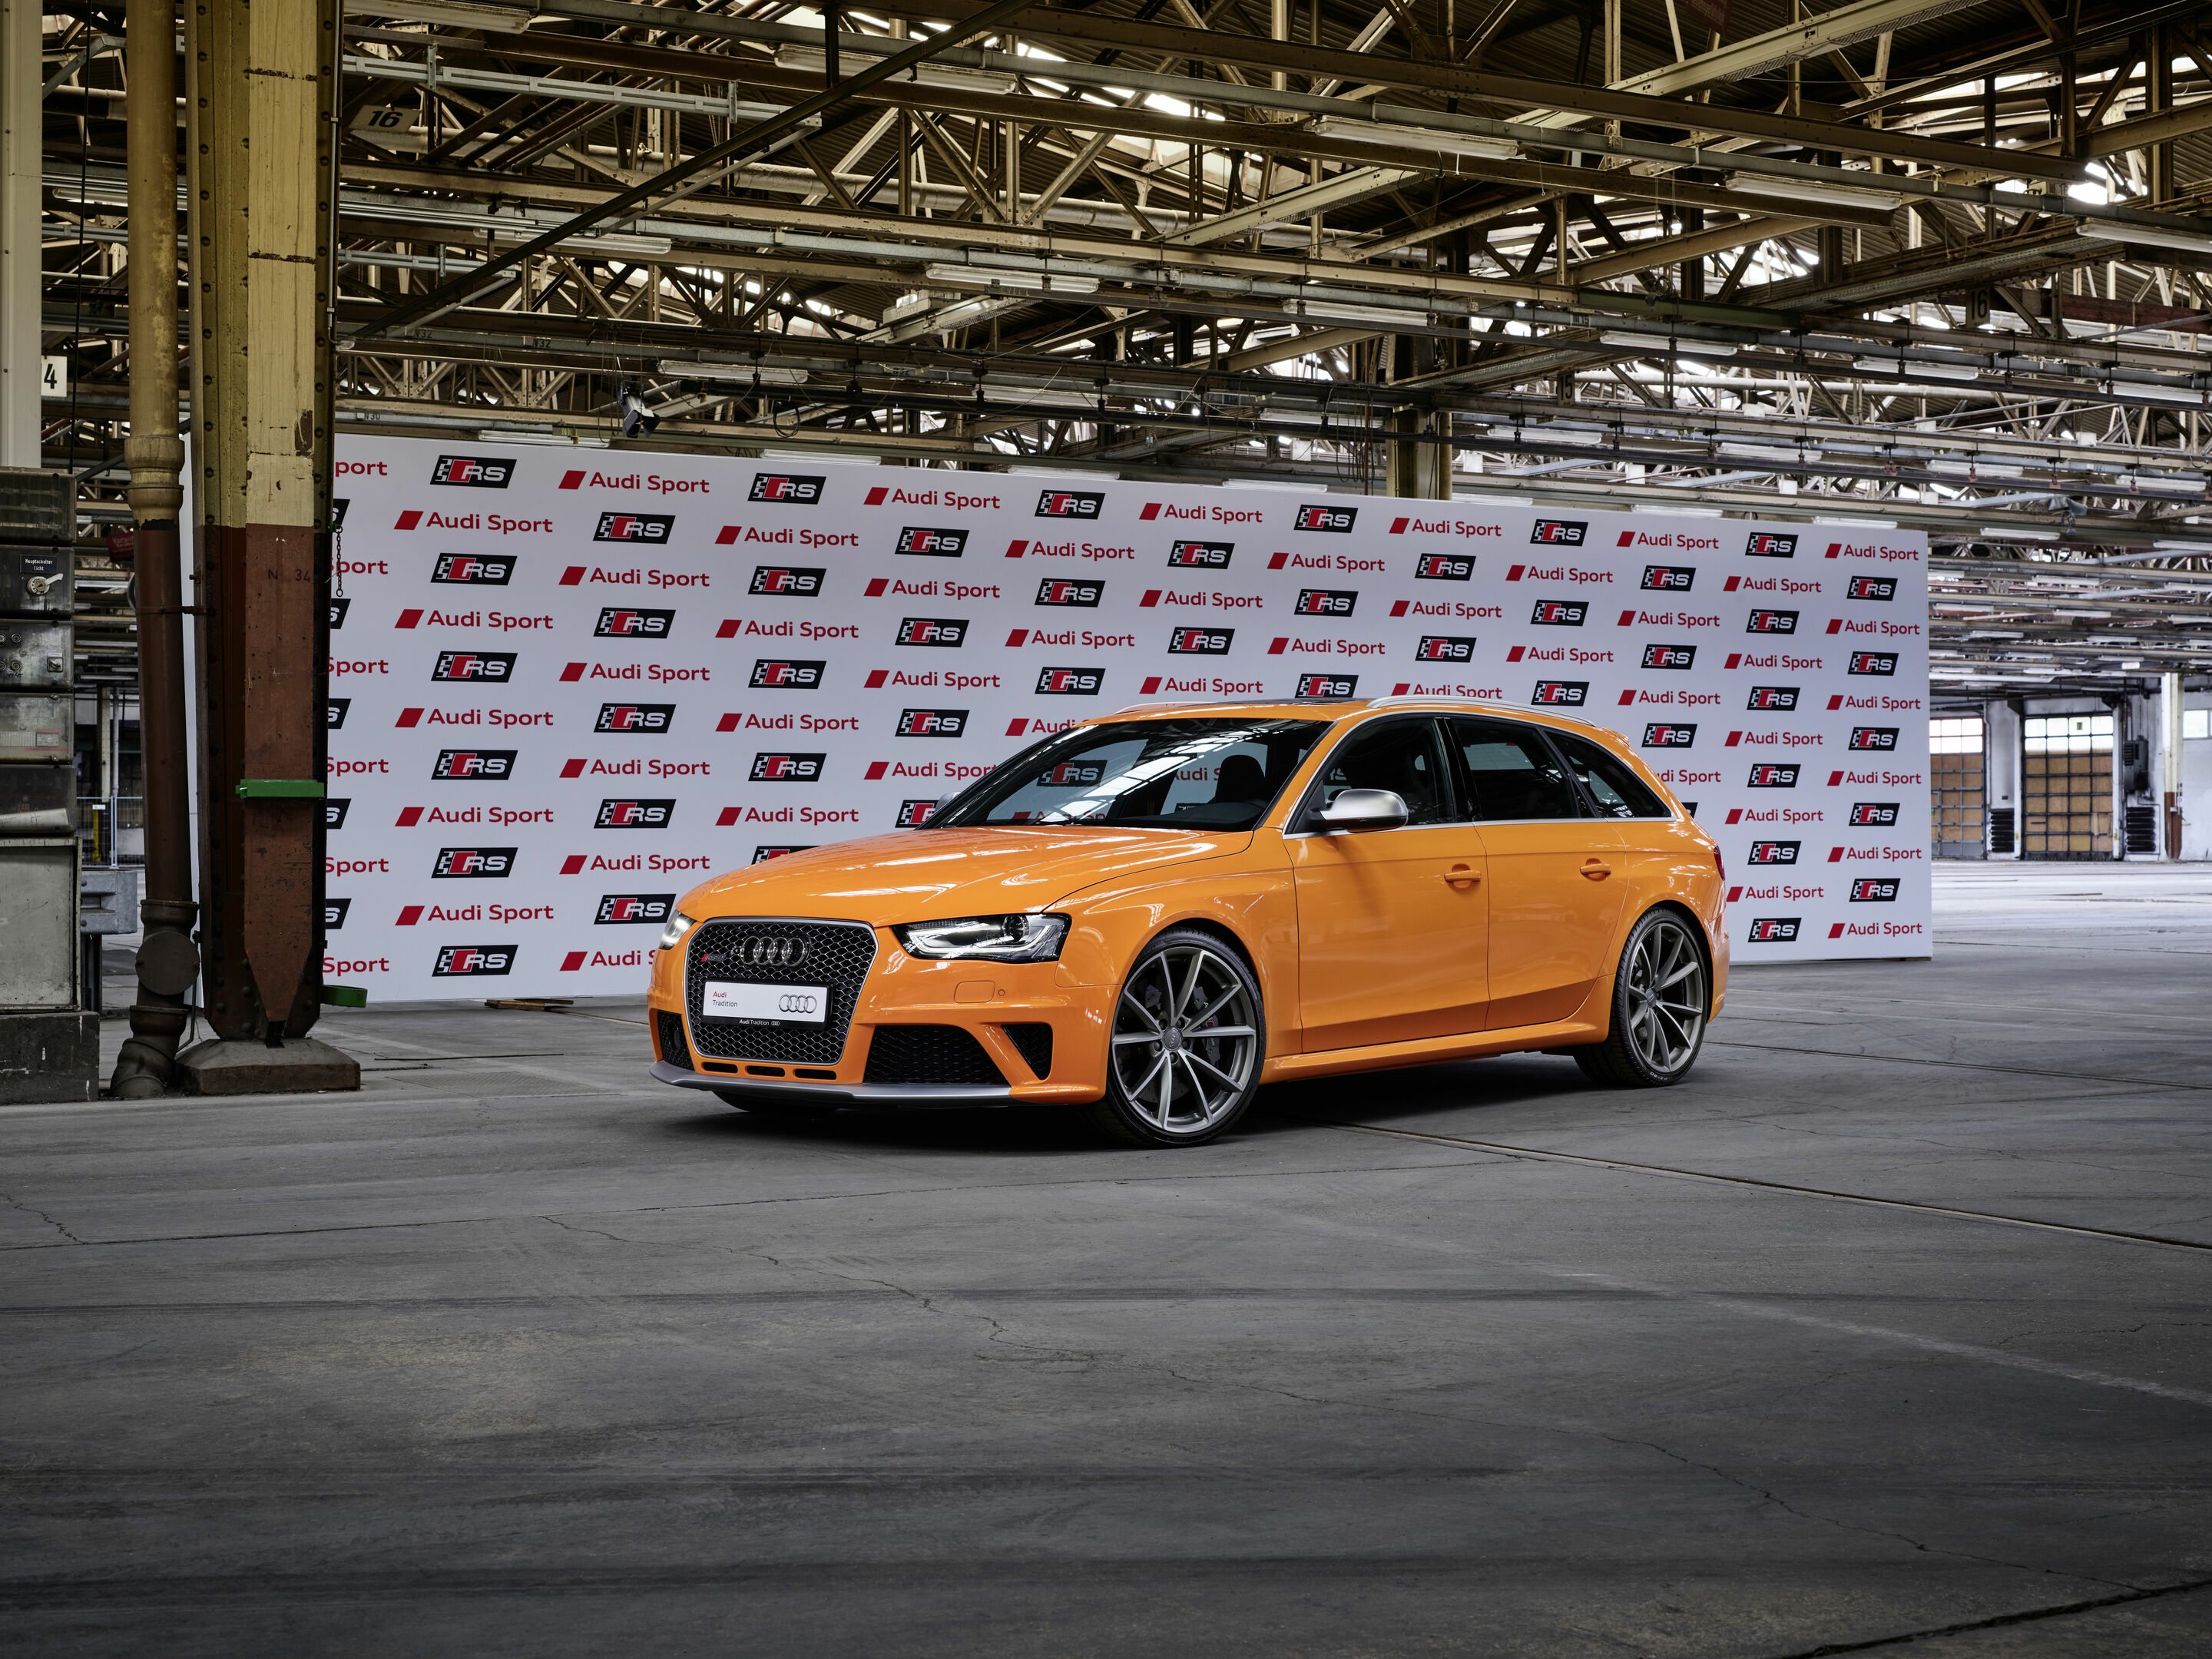 High-Performance. Full of Character. Individual. Audi Sport Is Celebrating 25 years of the Audi RS Models